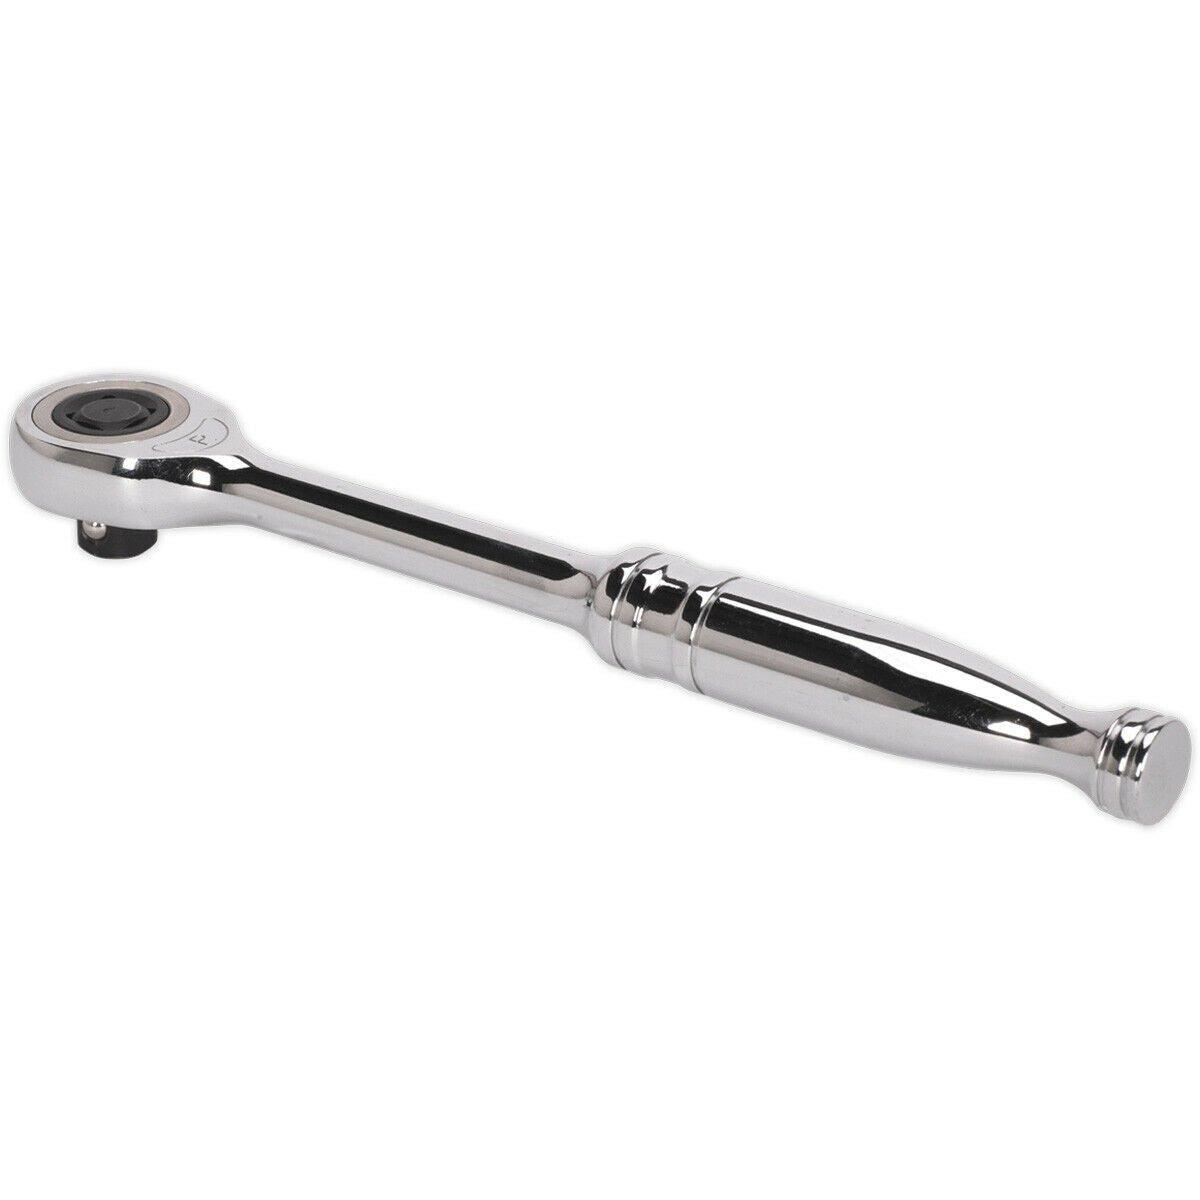 Gearless Ratchet Wrench - 3/8 Inch Sq Drive - Push-Through Reverse Steel Wrench